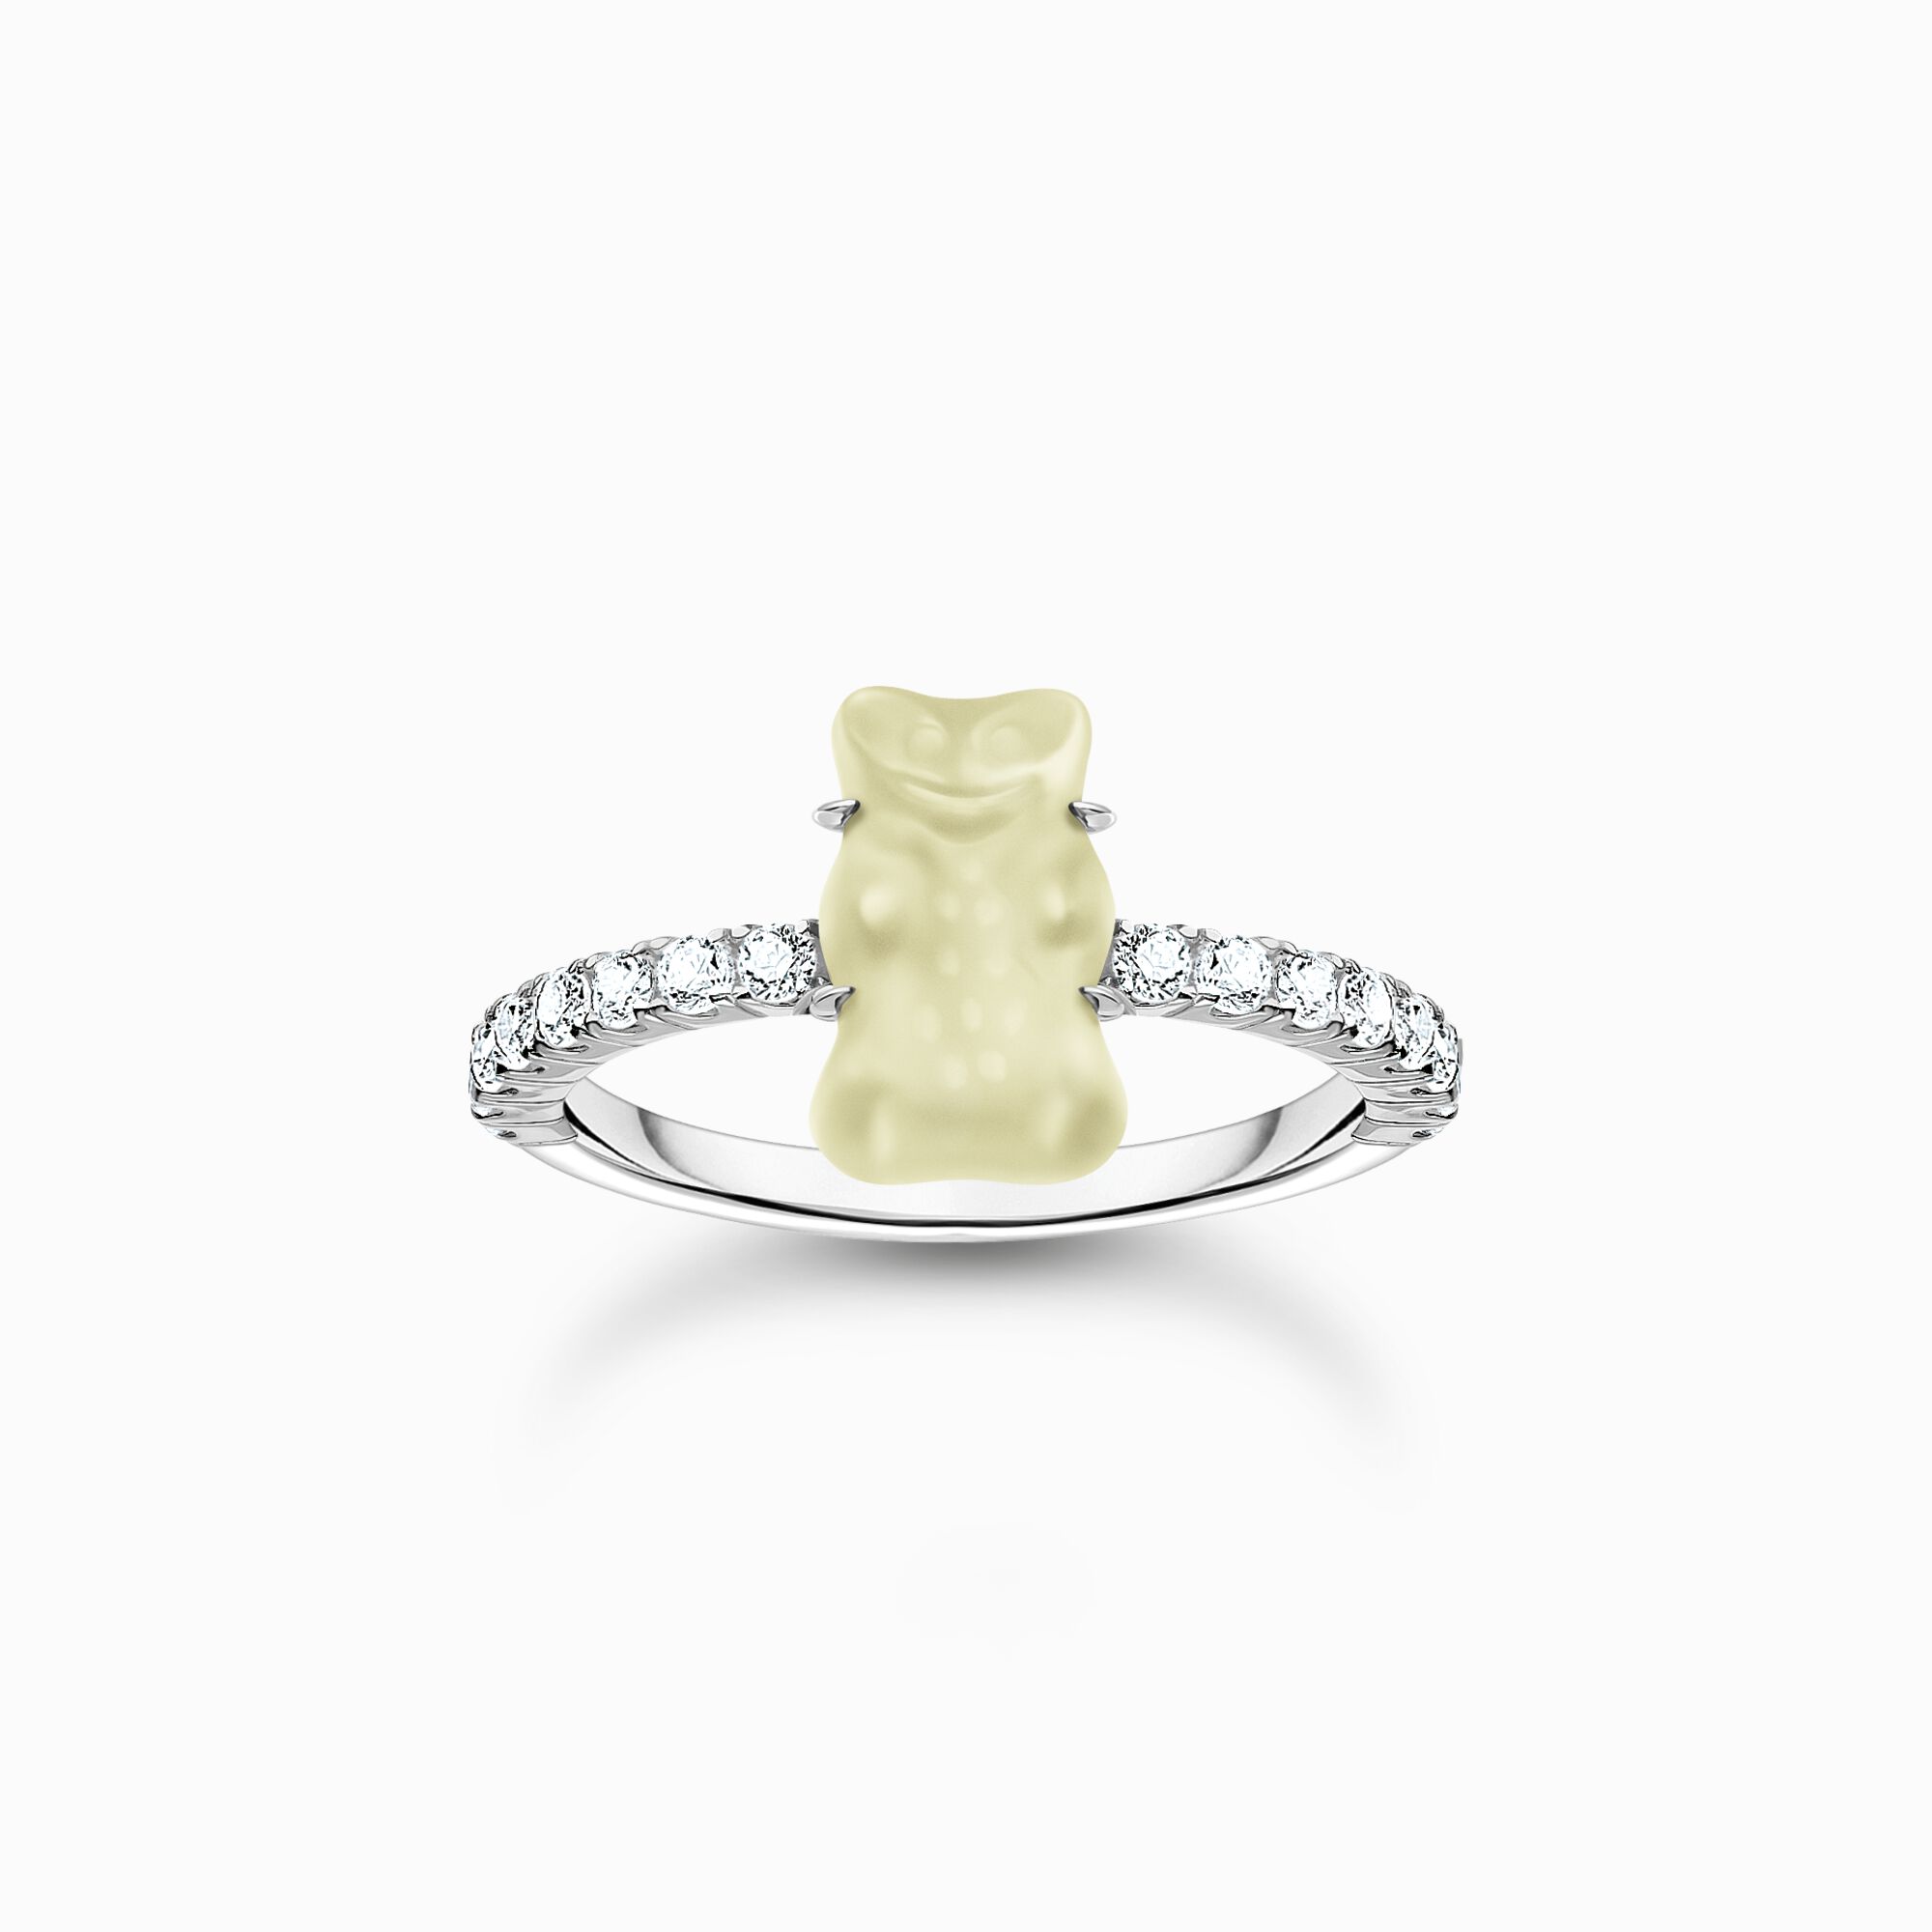 Silver ring with white mini sized goldbears and zirconia from the Charming Collection collection in the THOMAS SABO online store